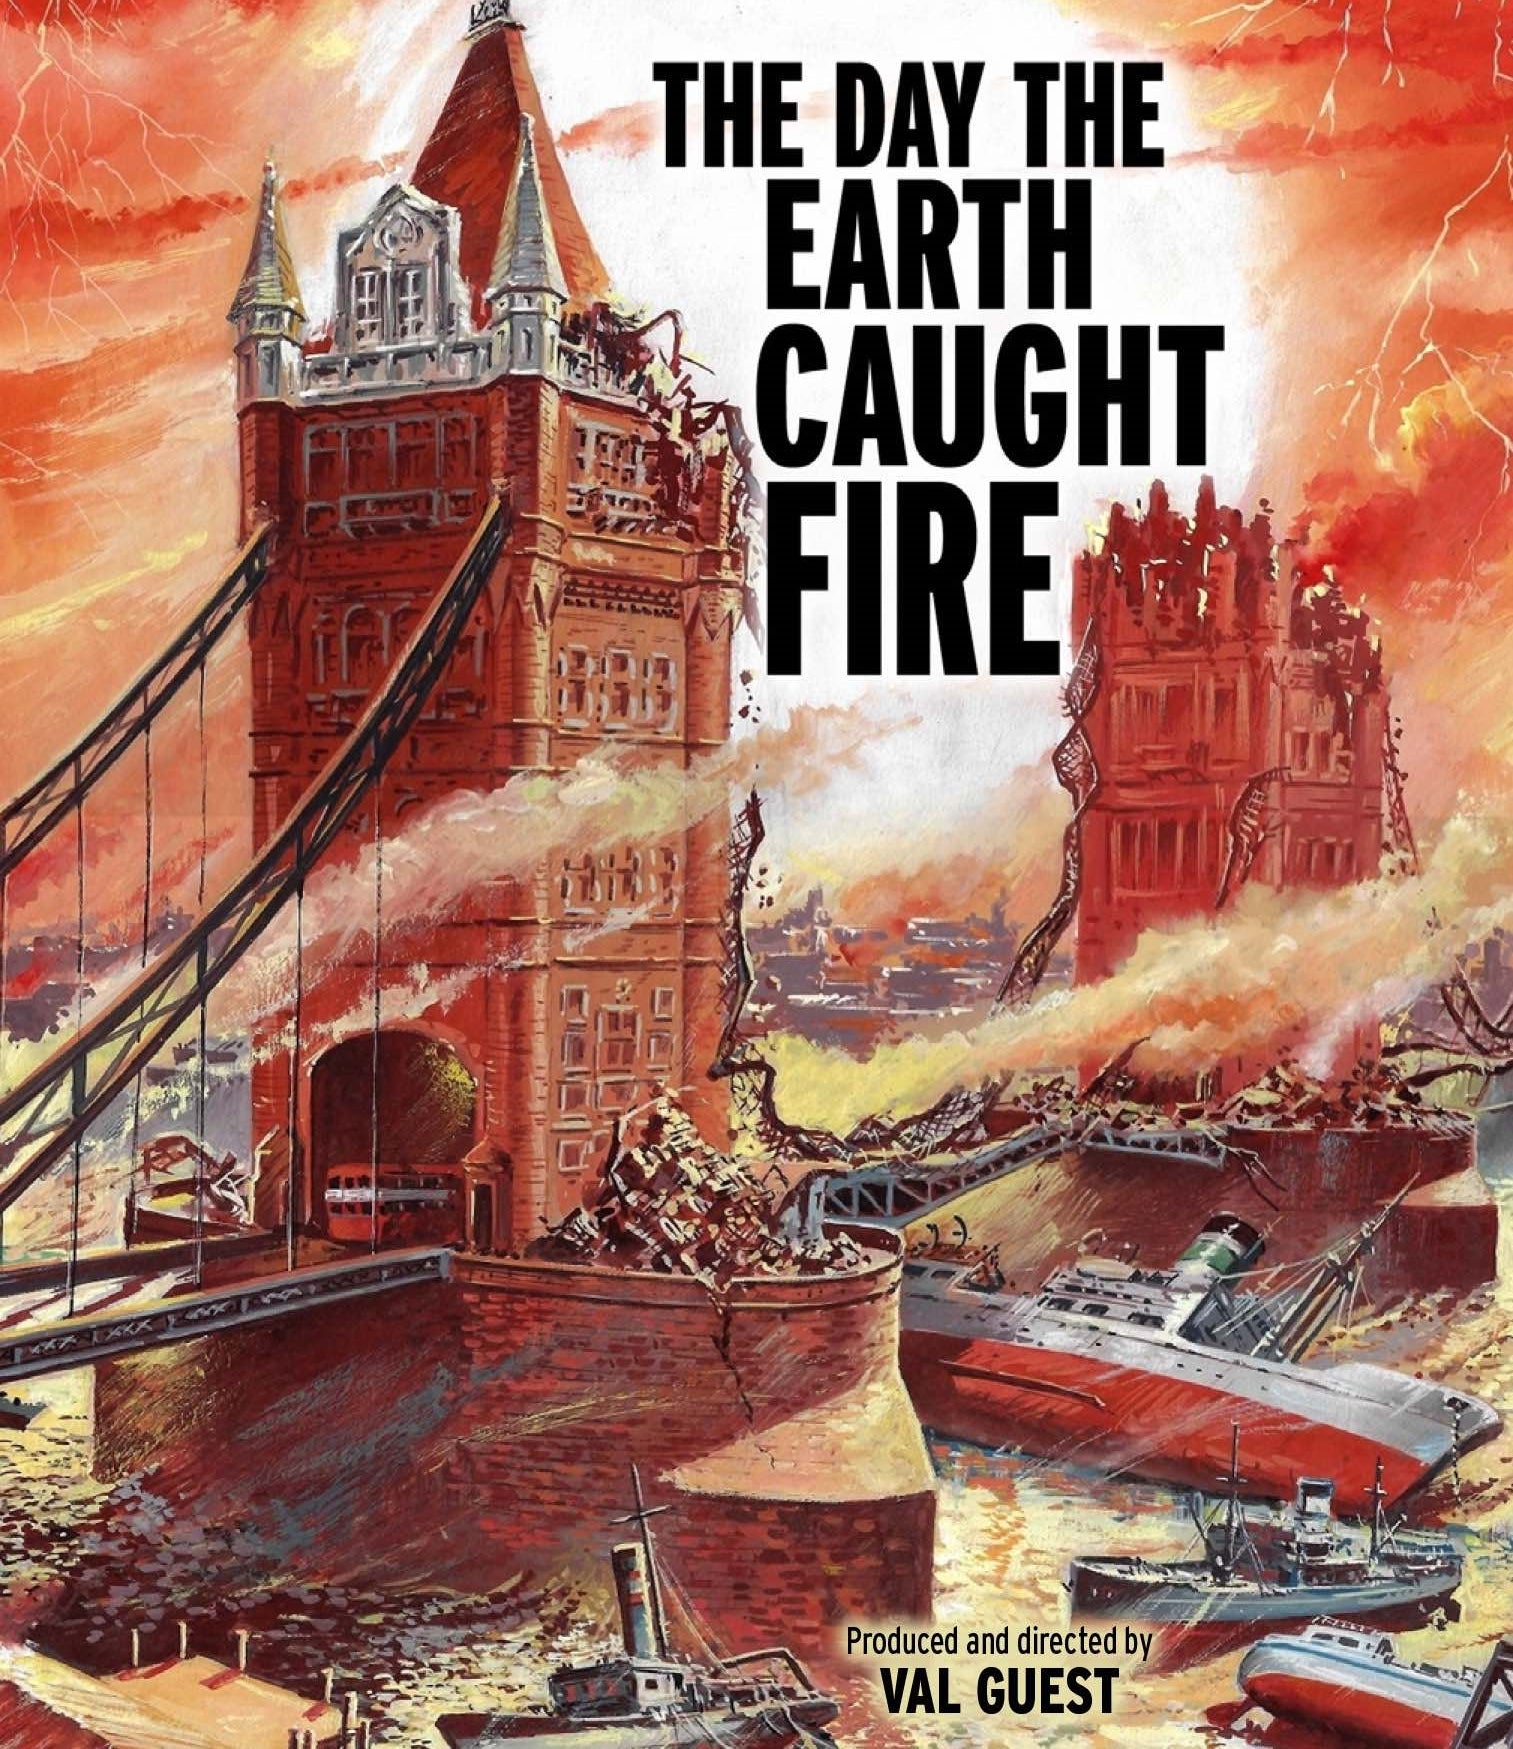 THE DAY THE EARTH CAUGHT FIRE BLU-RAY